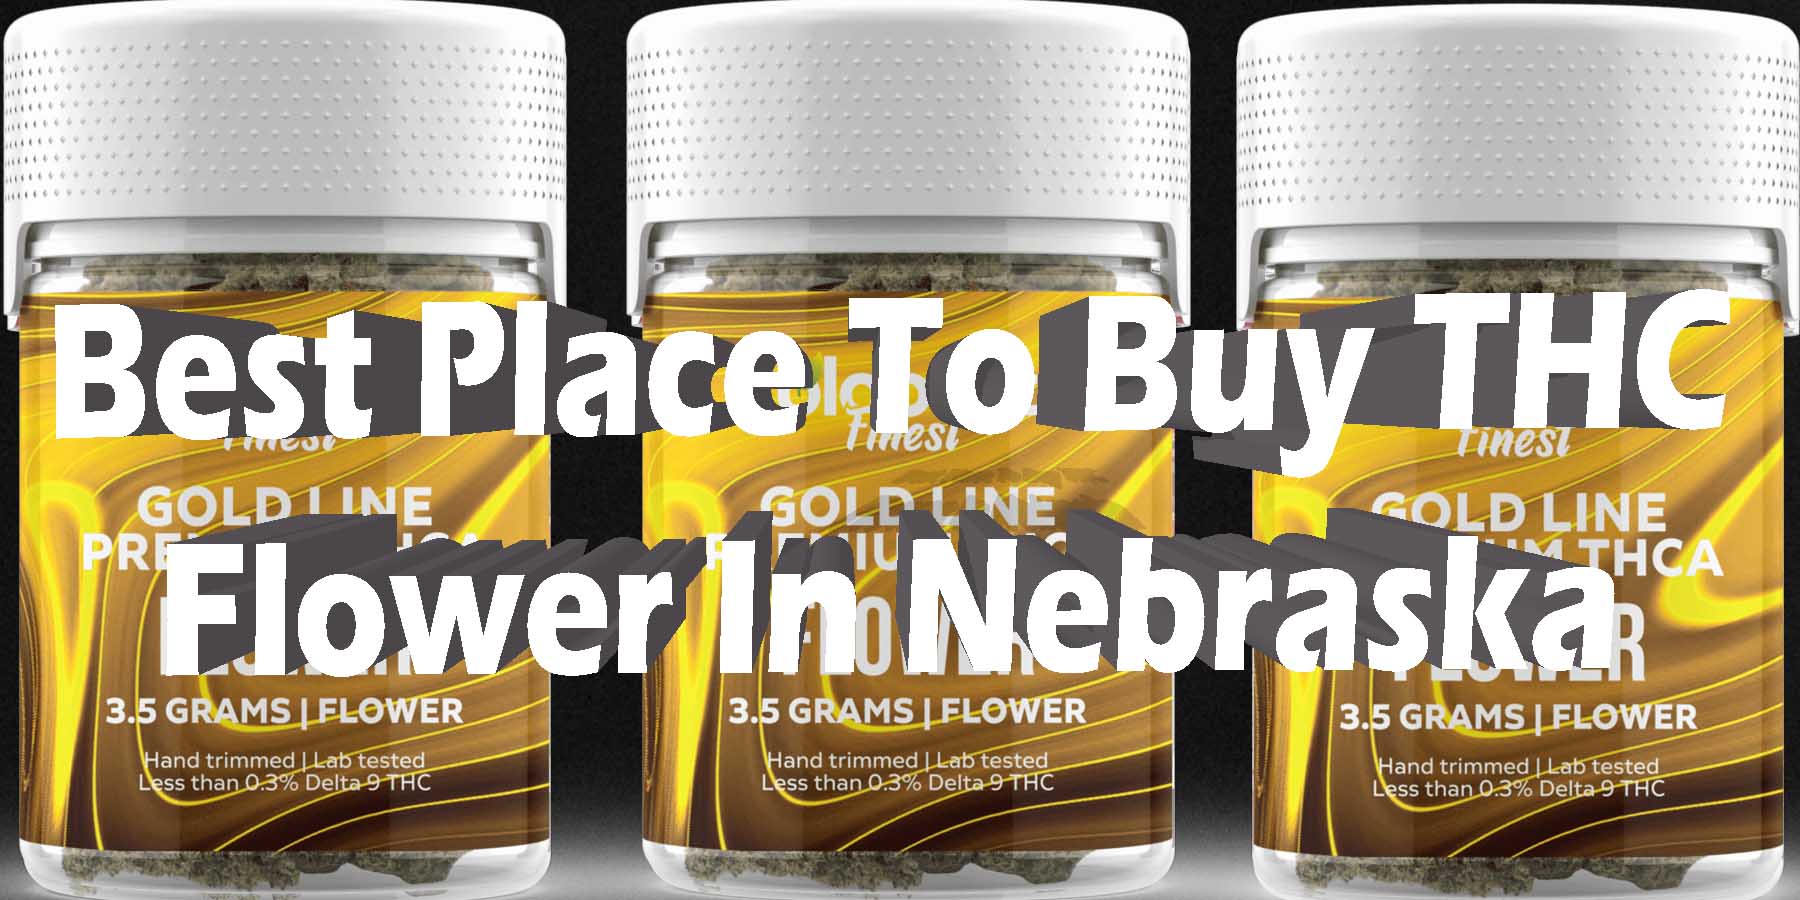 Best Place to Buy THC Flower in Nebraska HowToGetNearMe BestPlace LowestPrice Coupon Discount-For Smoking Best High Smoke Shop Online Near Me StrongestBrand Binoid